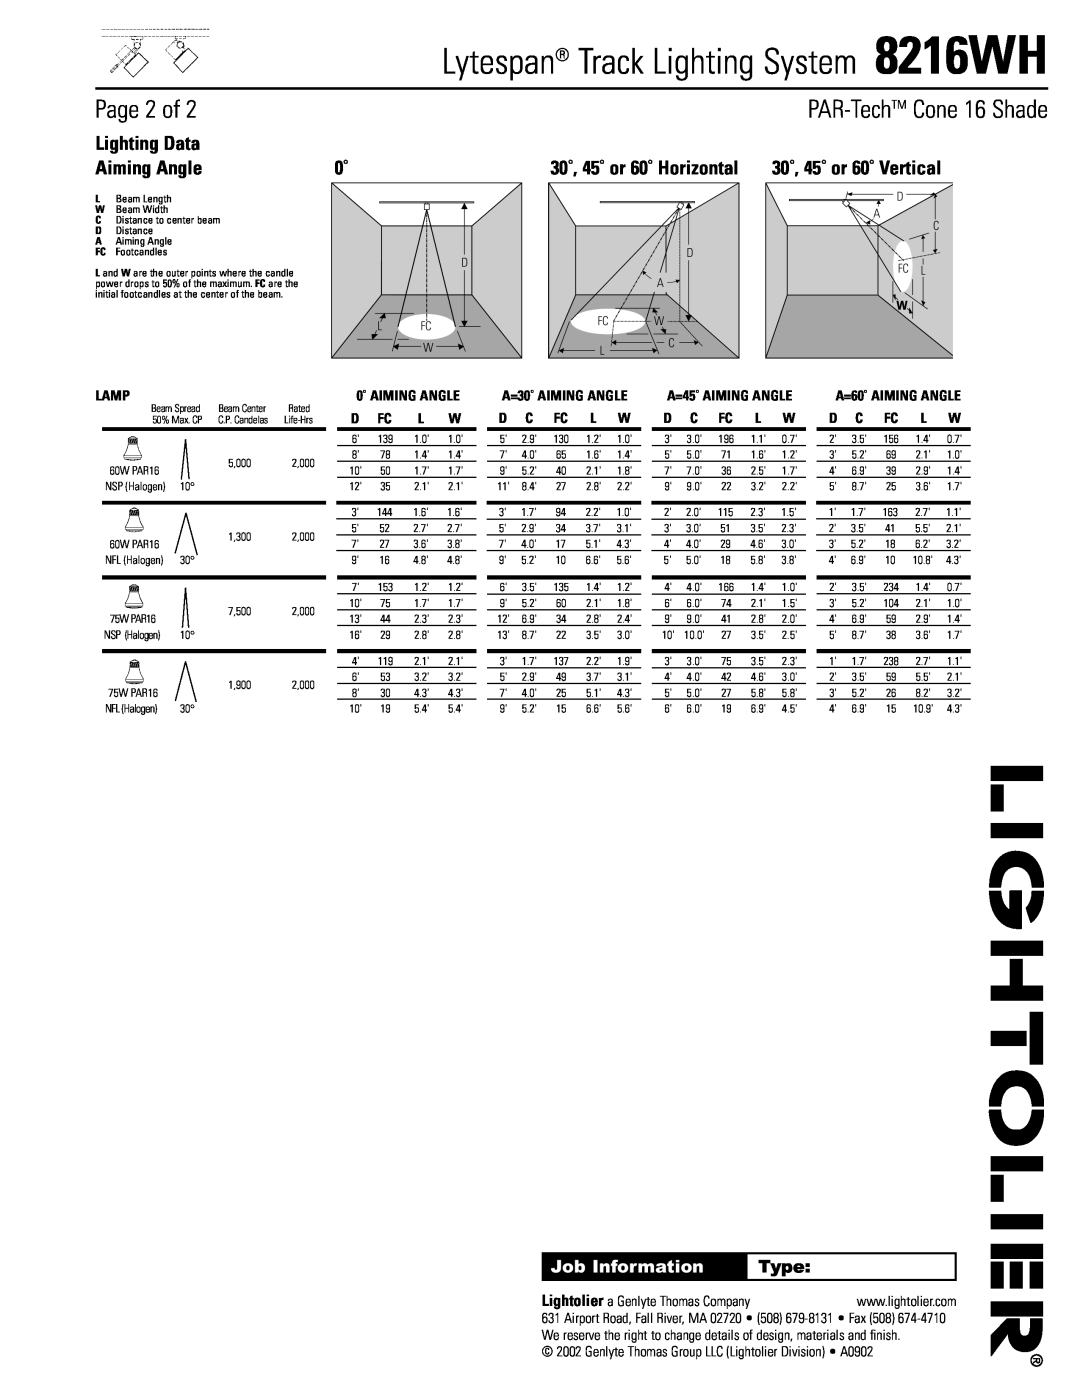 Lightolier 8216WH Page 2 of, Lighting Data, Aiming Angle, 30˚, 45˚ or 60˚ Horizontal, Type, PAR-TechTM Cone 16 Shade, Lamp 